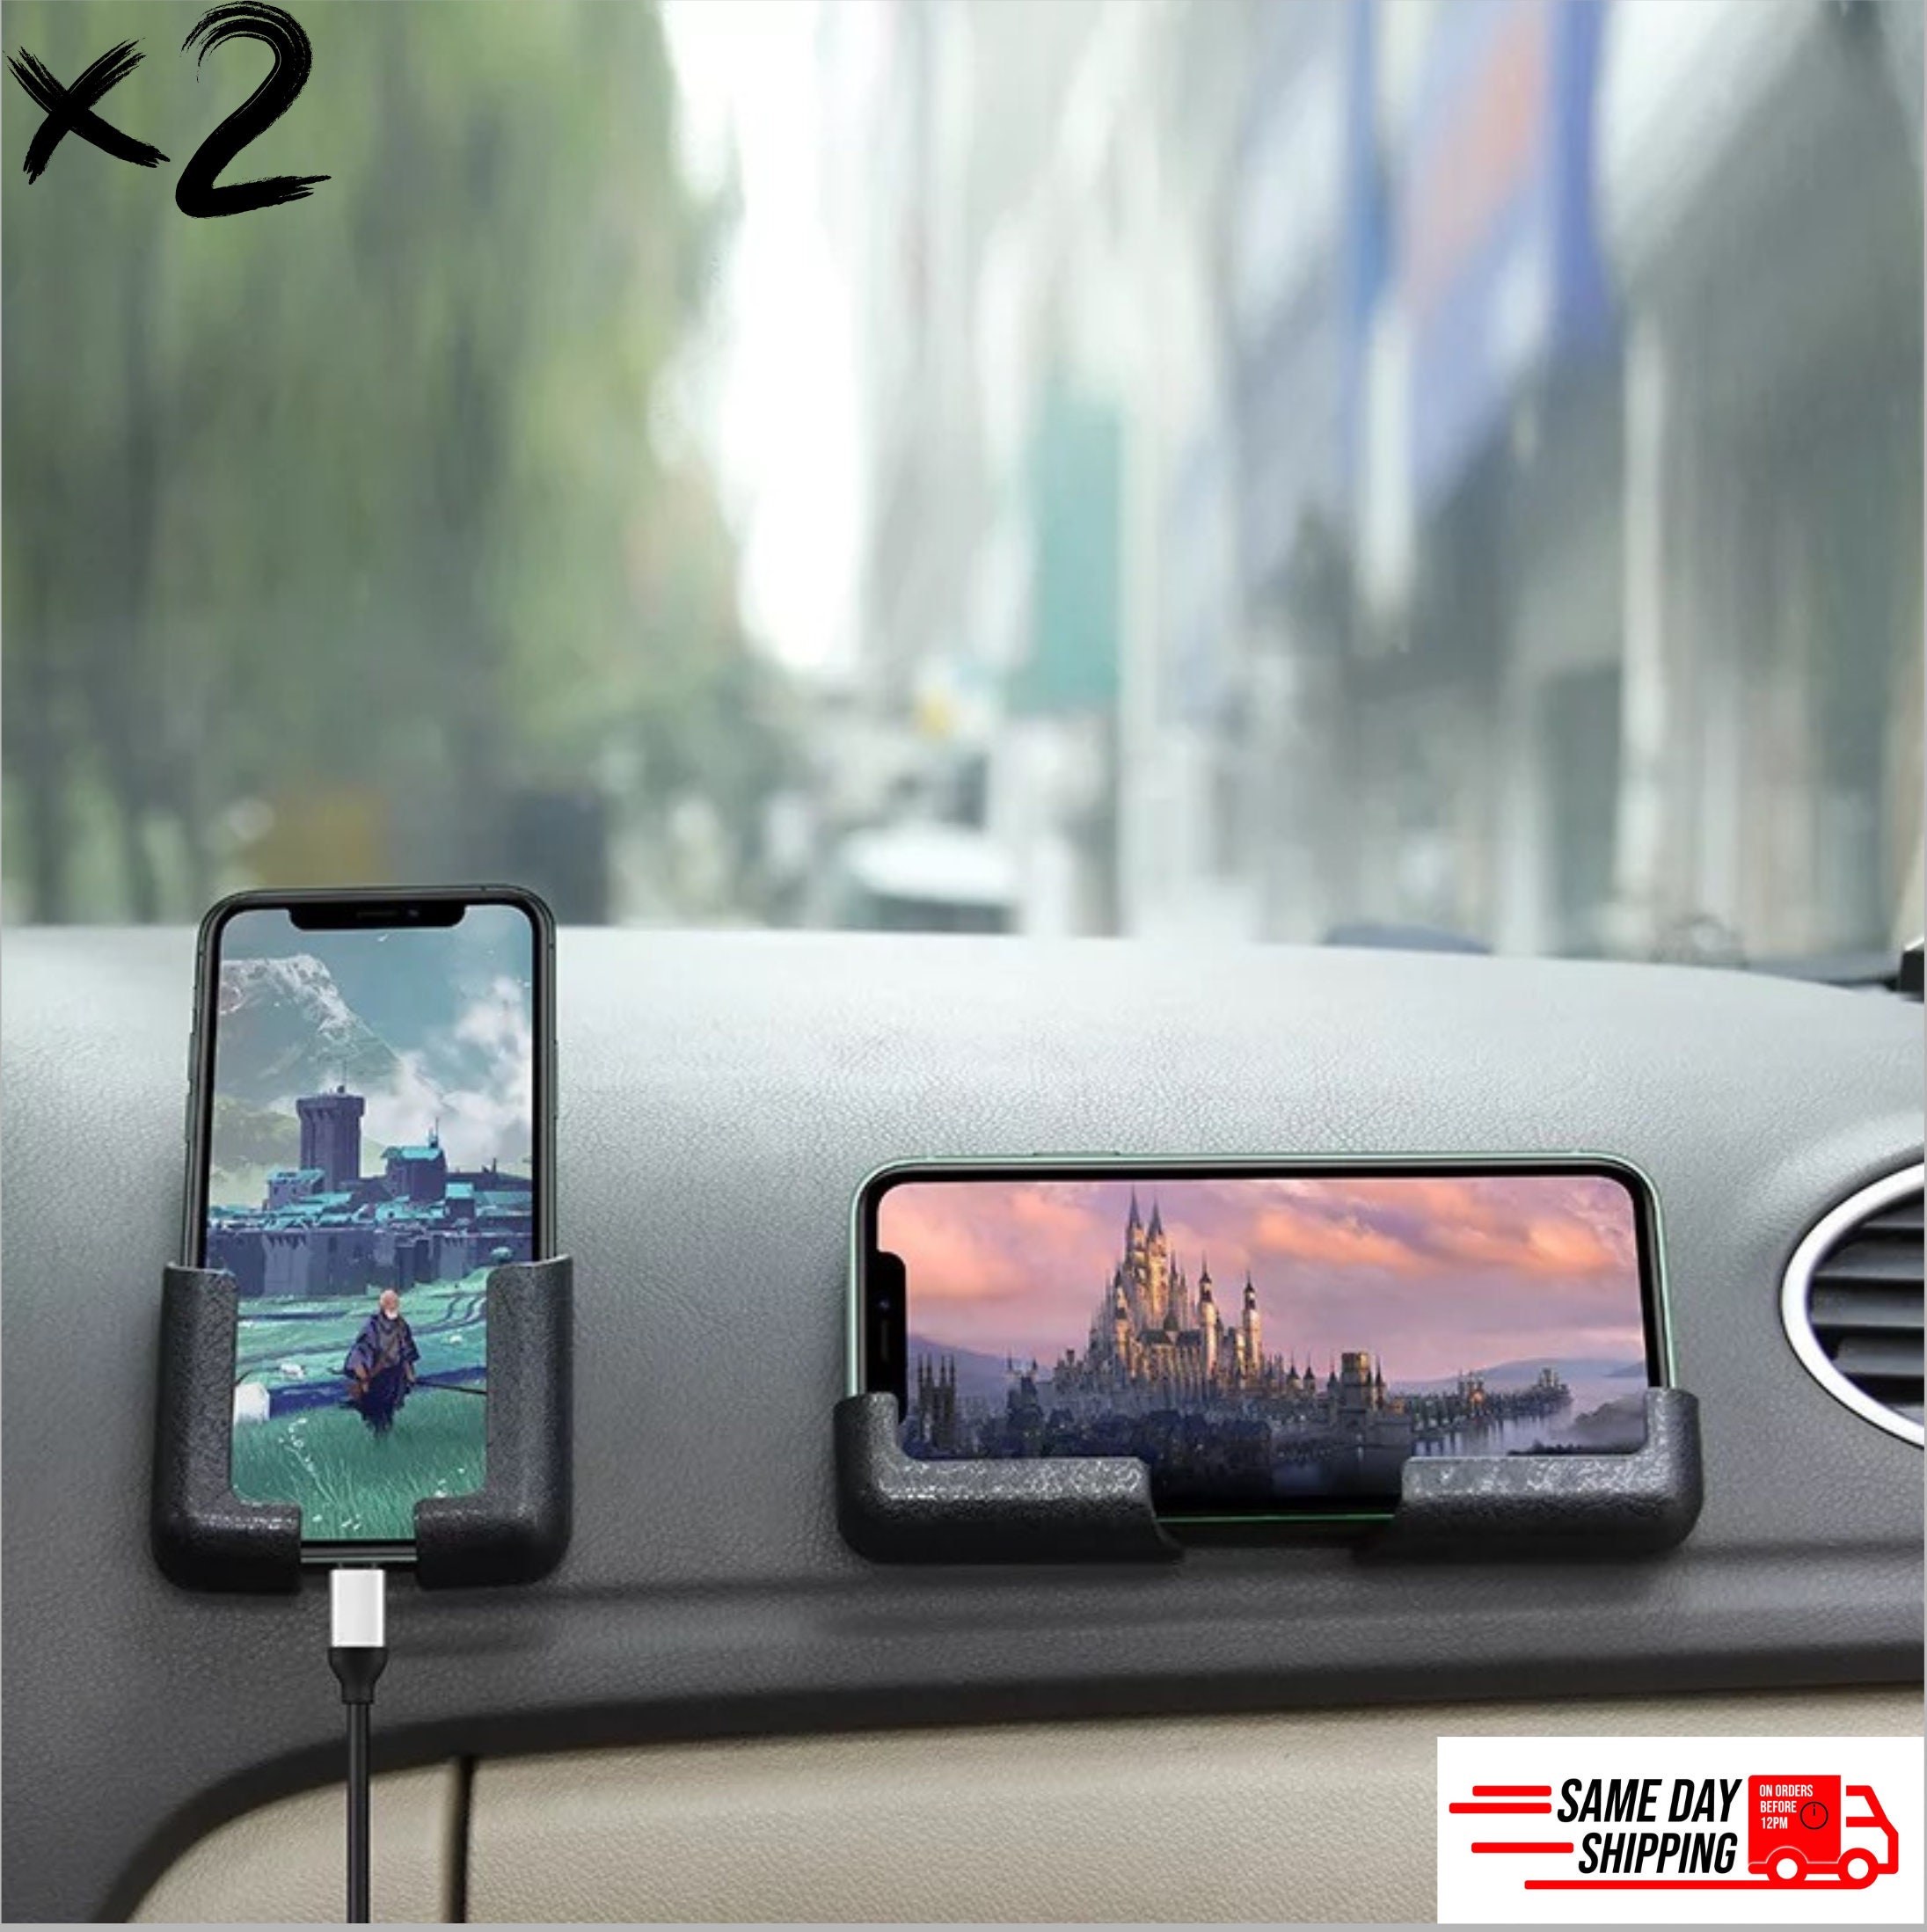 Universal Phone Holder Car with Dashboard Stand - Gravity Smartphone Holder  Silver